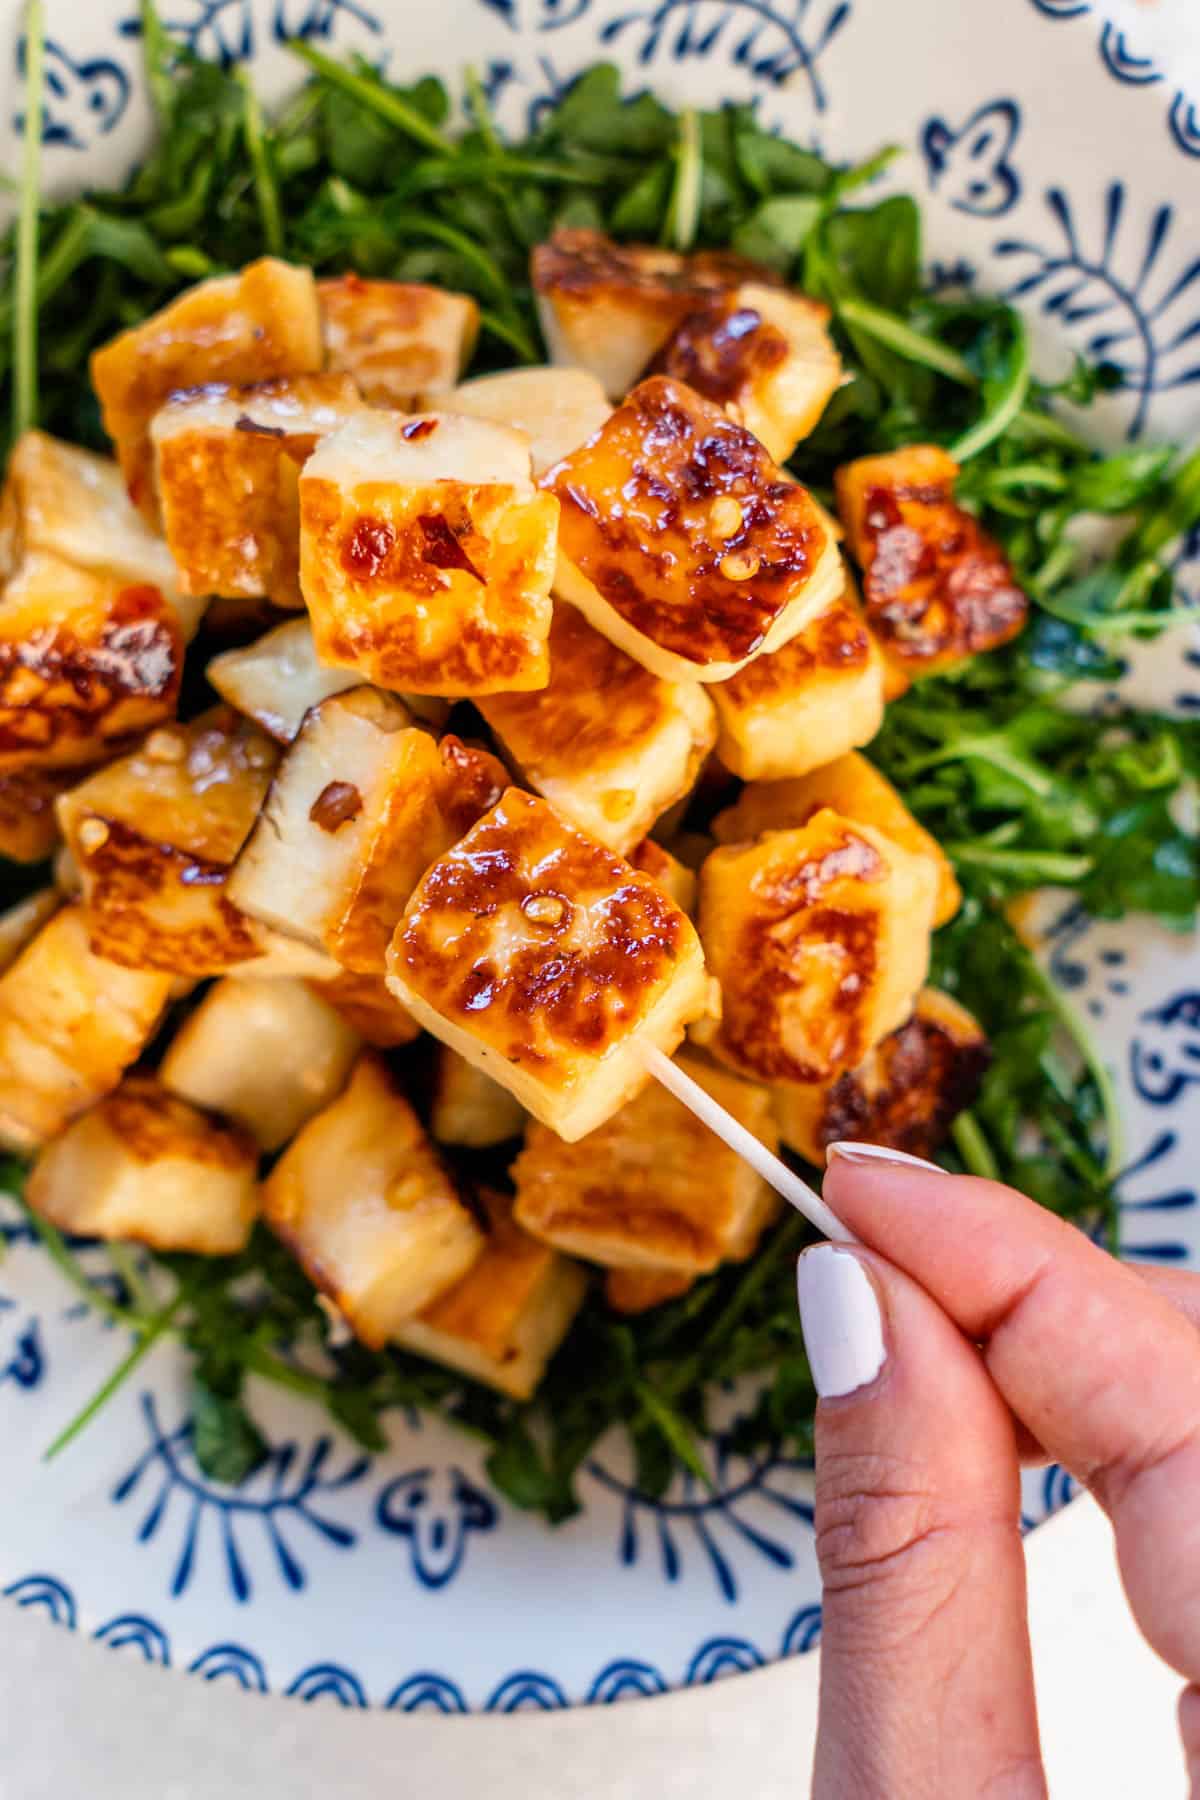 Piece of fried halloumi being picked with a toothpick